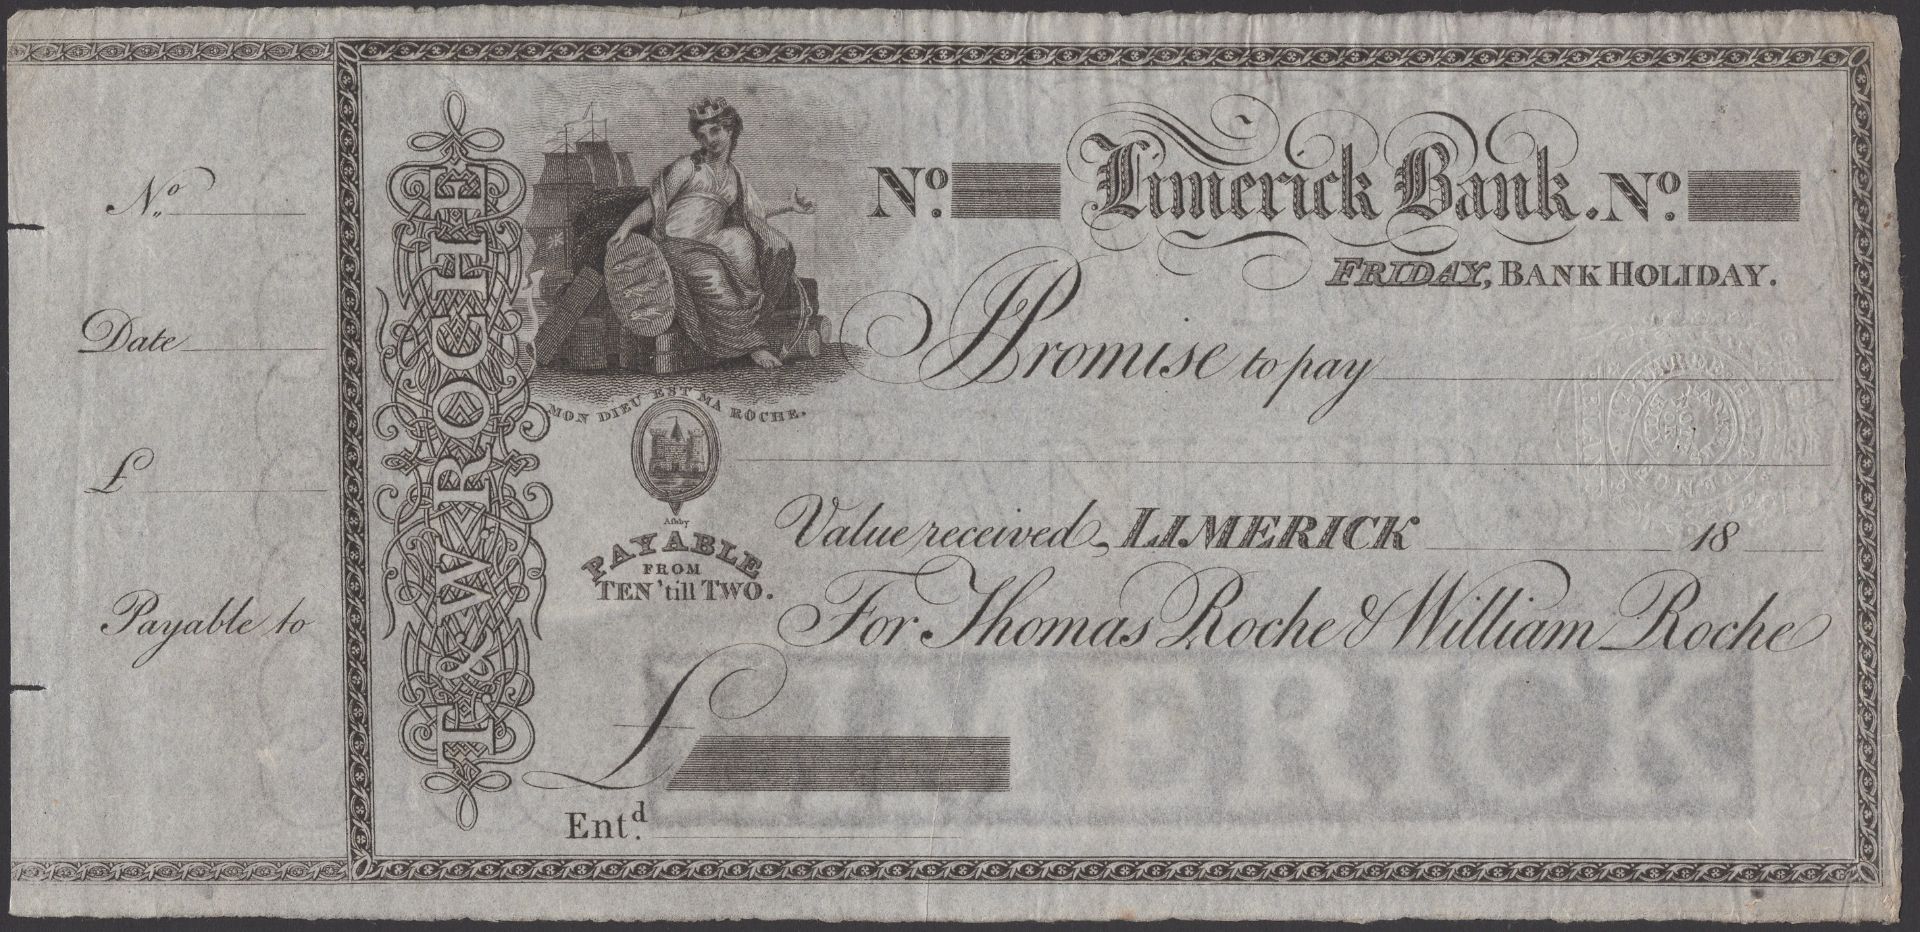 Limerick Bank, for Thomas Roche & William Roche, unissued and undenominated note, 18- (1801-...